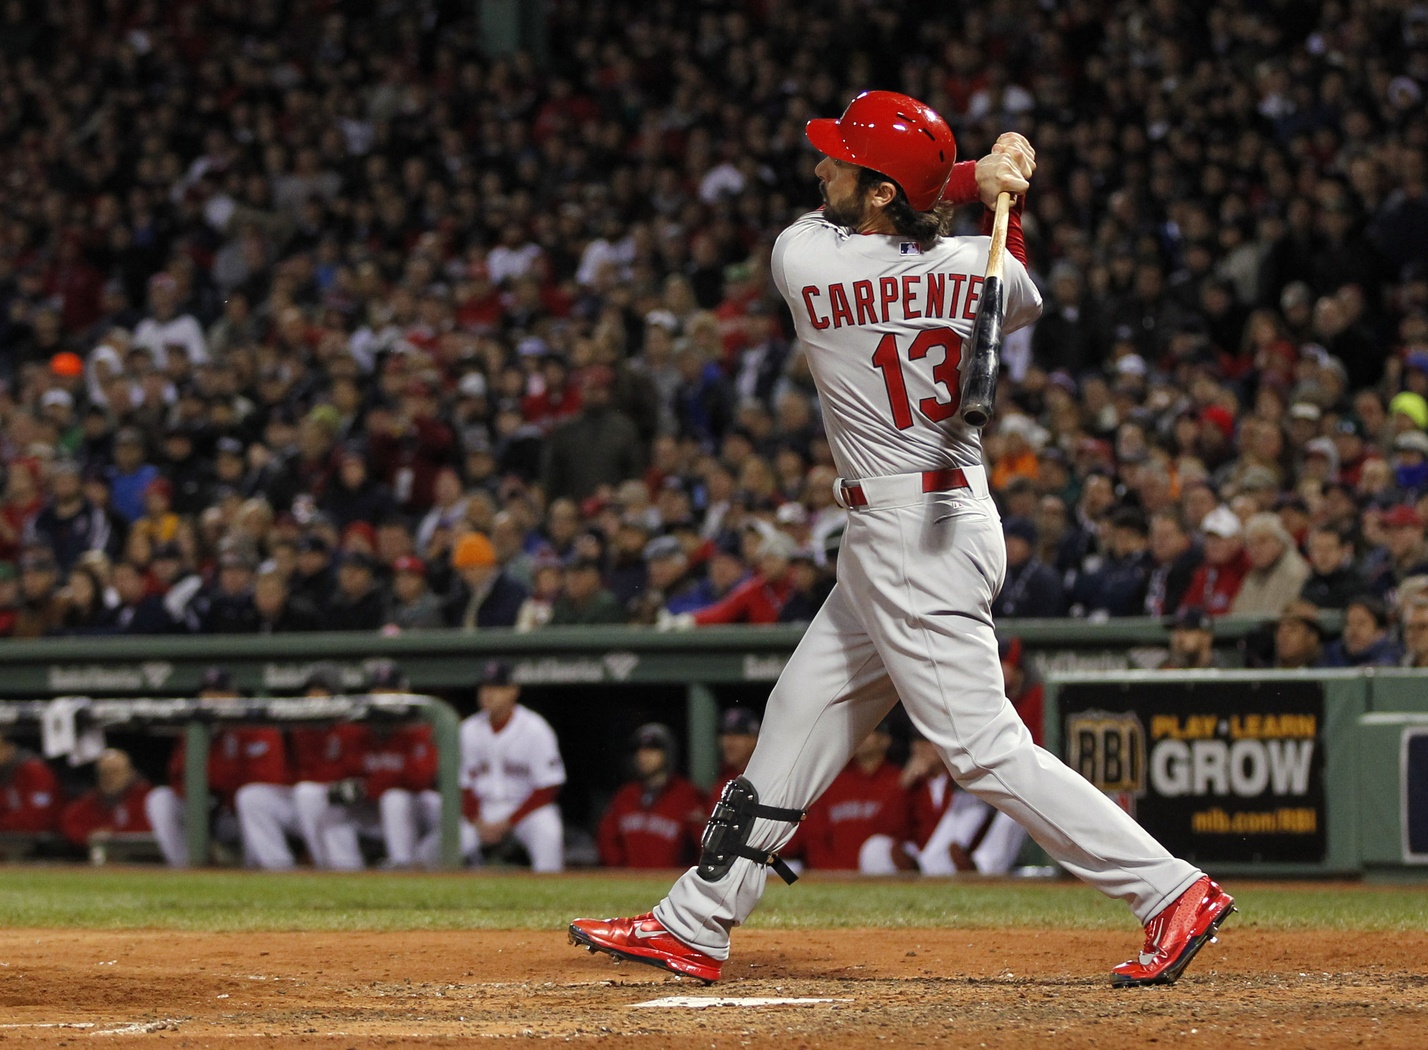 Matt Carpenter marvels at a hit. Photo by Greg M. Cooper, USA Today Sports Images